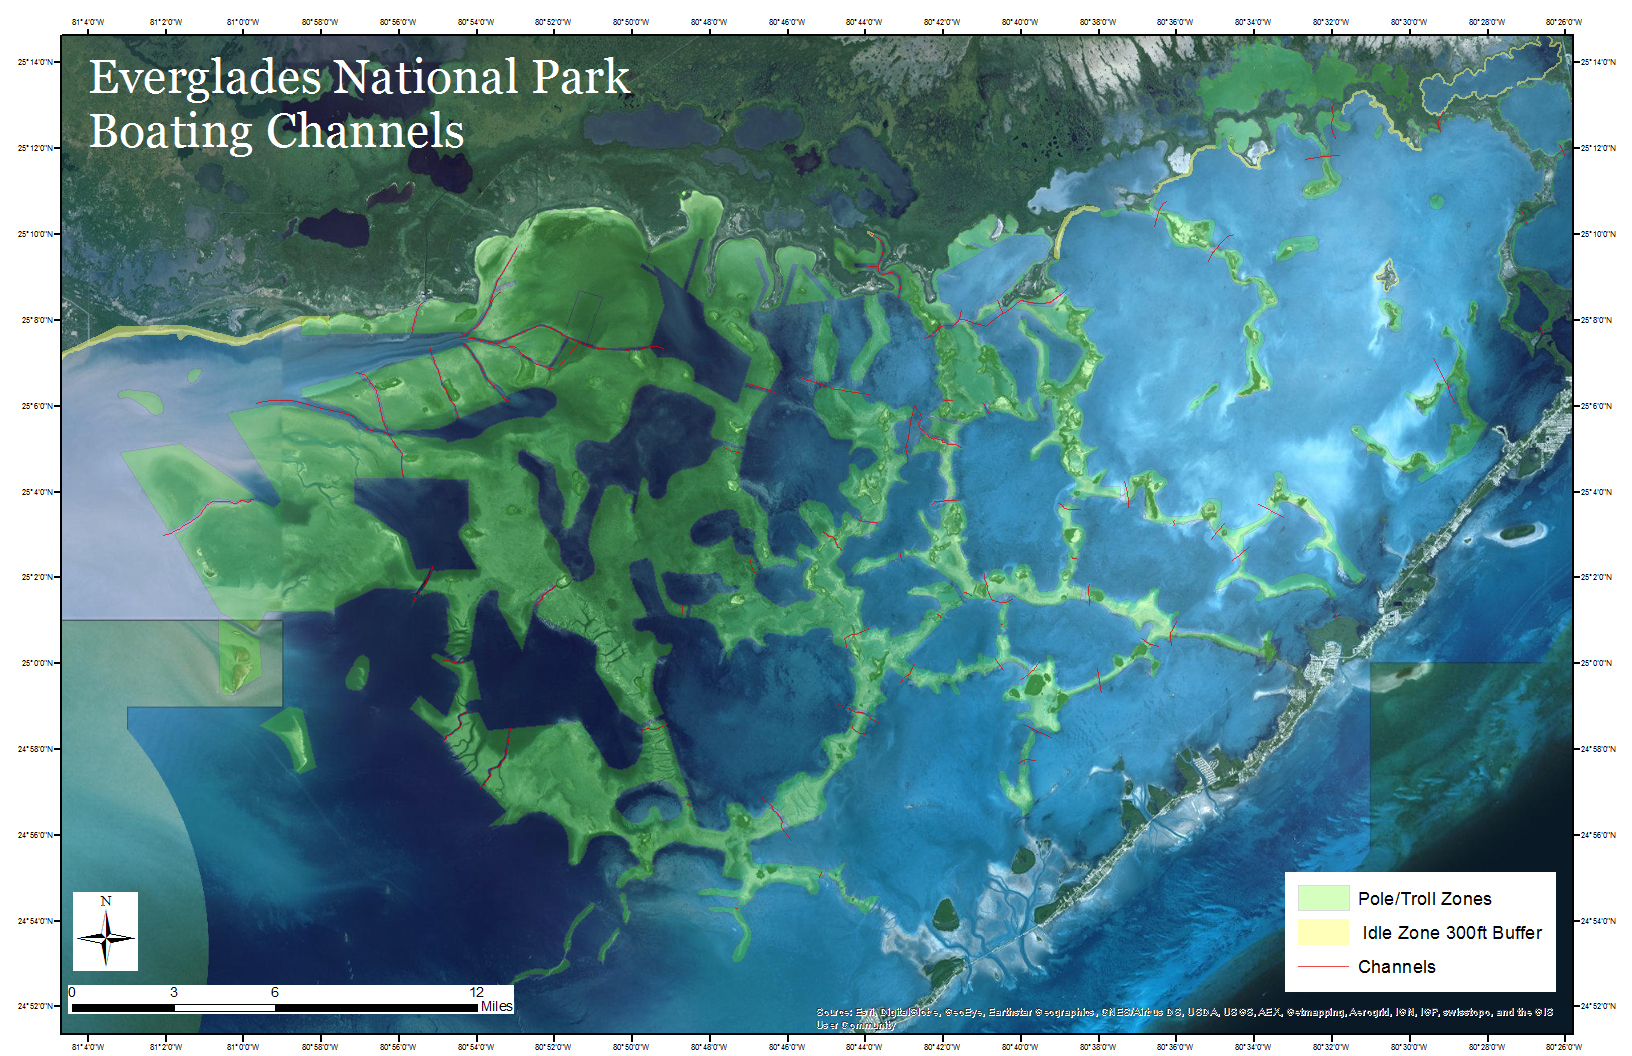 UA Professor to Aid Park Service in Mapping of Florida Bay